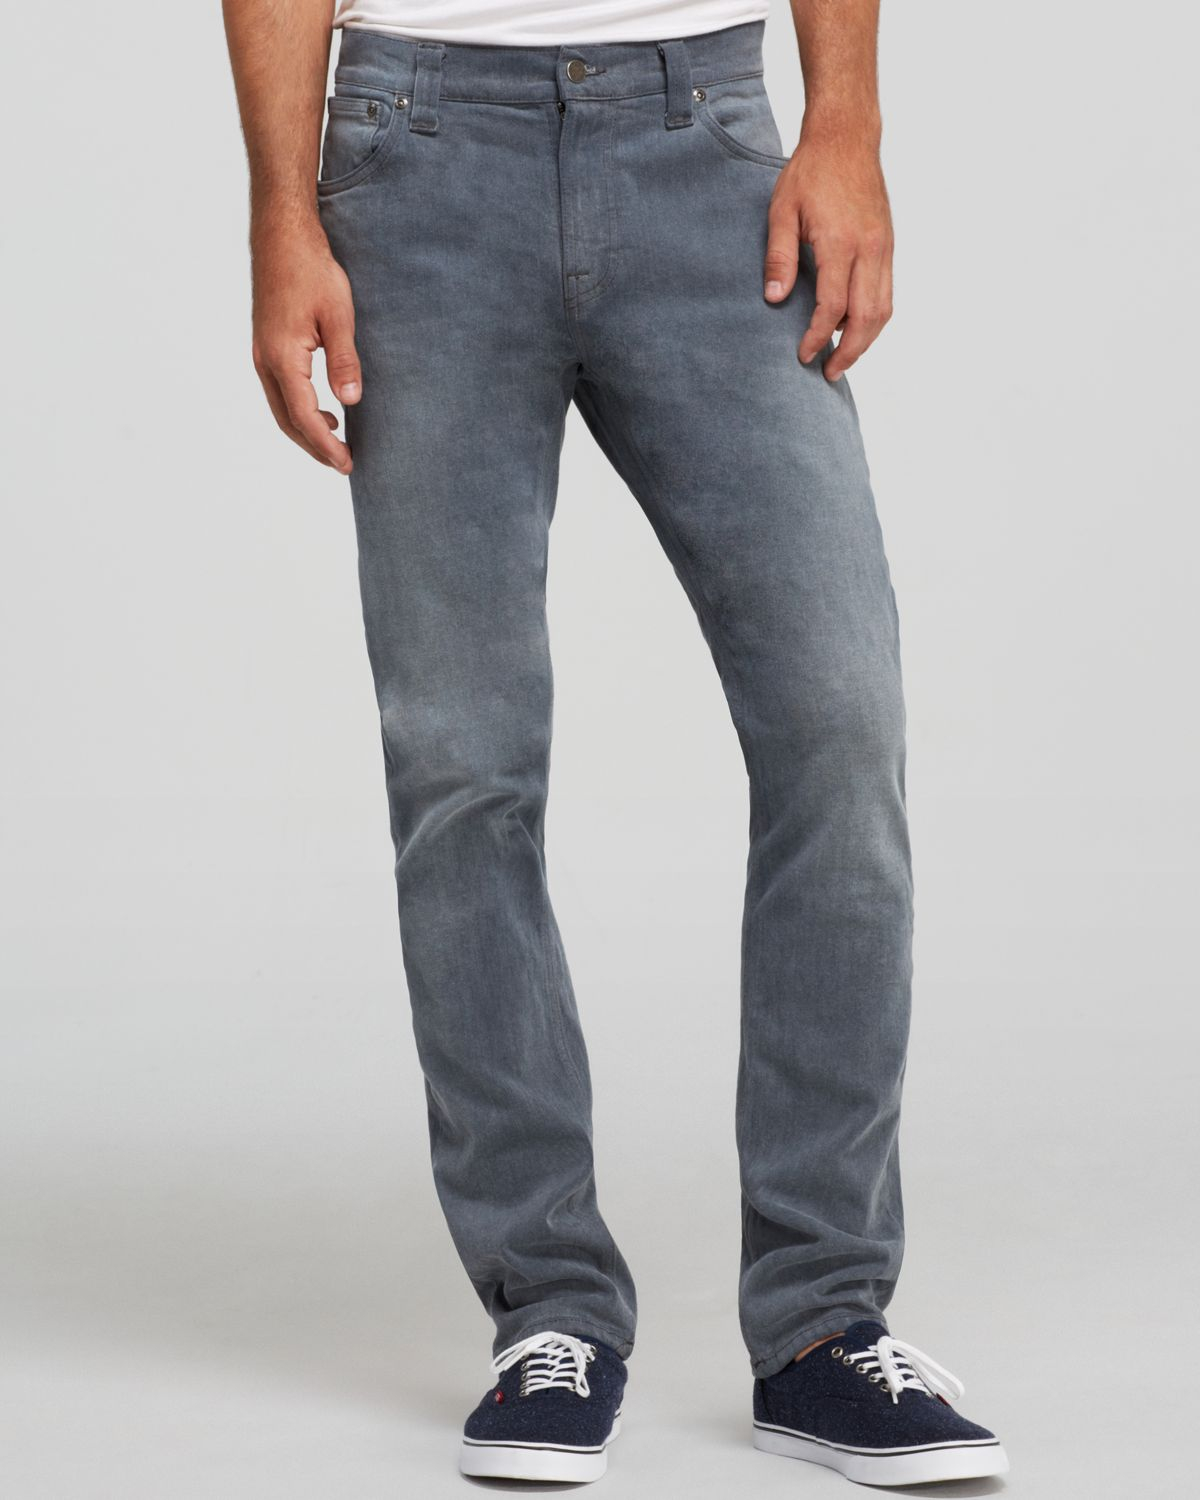 Nudie Jeans - Thin Finn Organic Slim Fit In Lighter Shade in Gray for ...